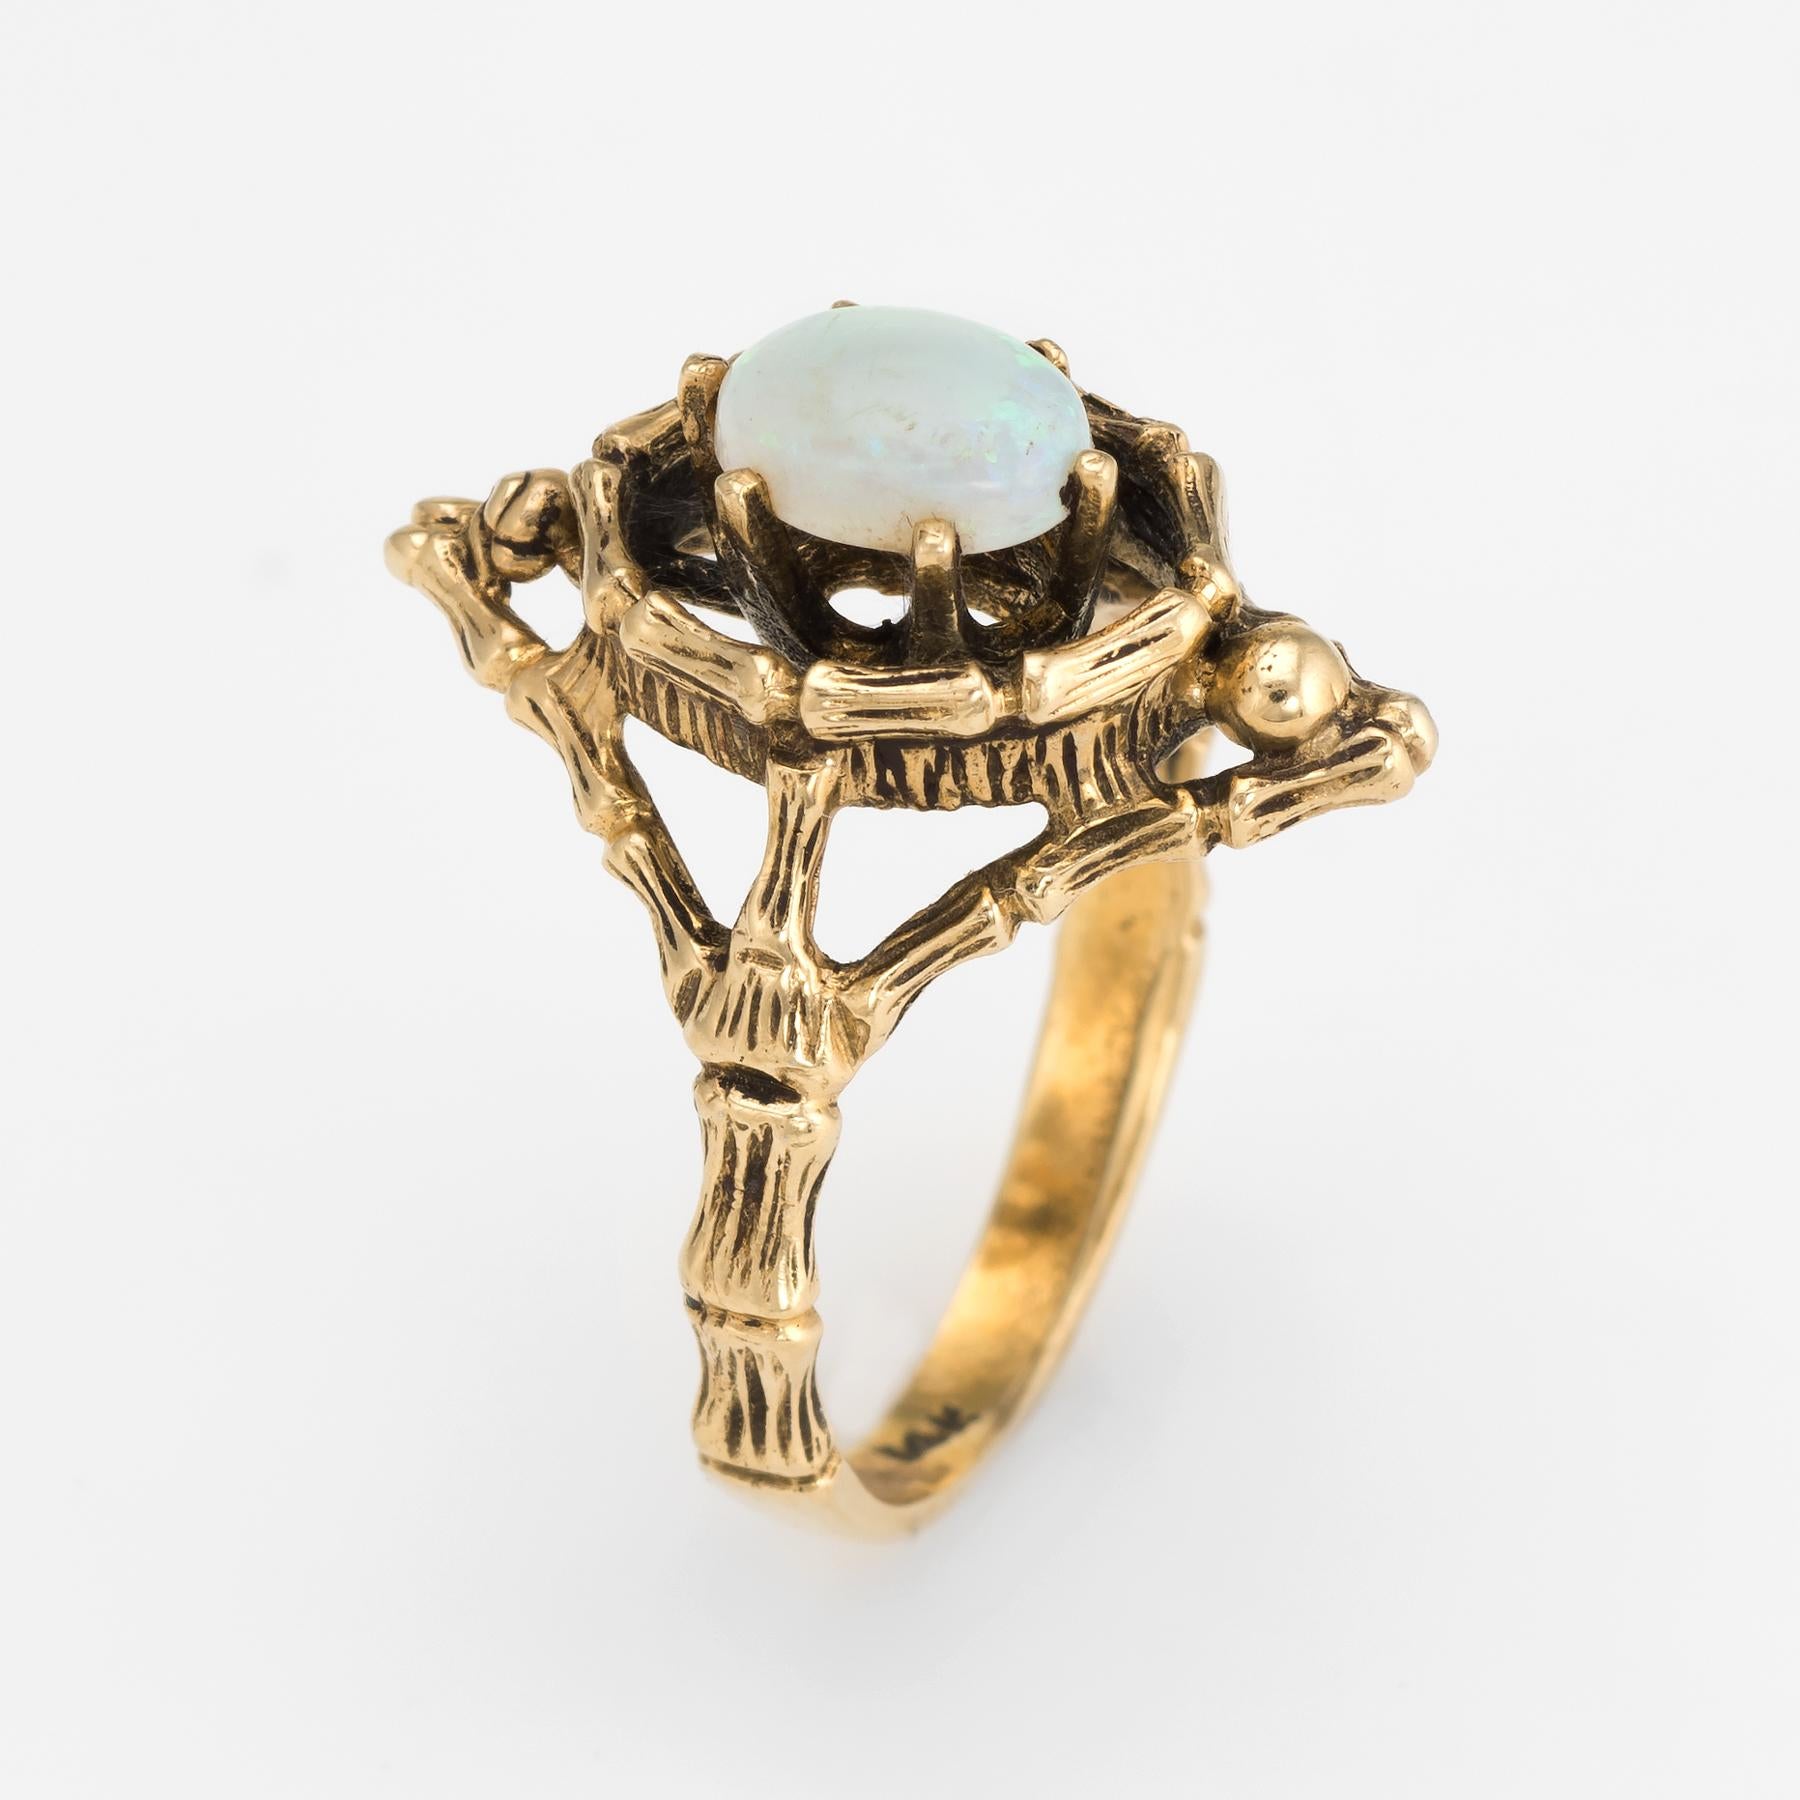 Finely detailed vintage opal cocktail ring (circa 1960s to 1970s), crafted in 14 karat yellow gold. 

Cabochon cut opal measures 7mm x 5mm (estimated at 0.60 carats). The opal is in excellent condition and free of cracks or chips. 

The stylish ring